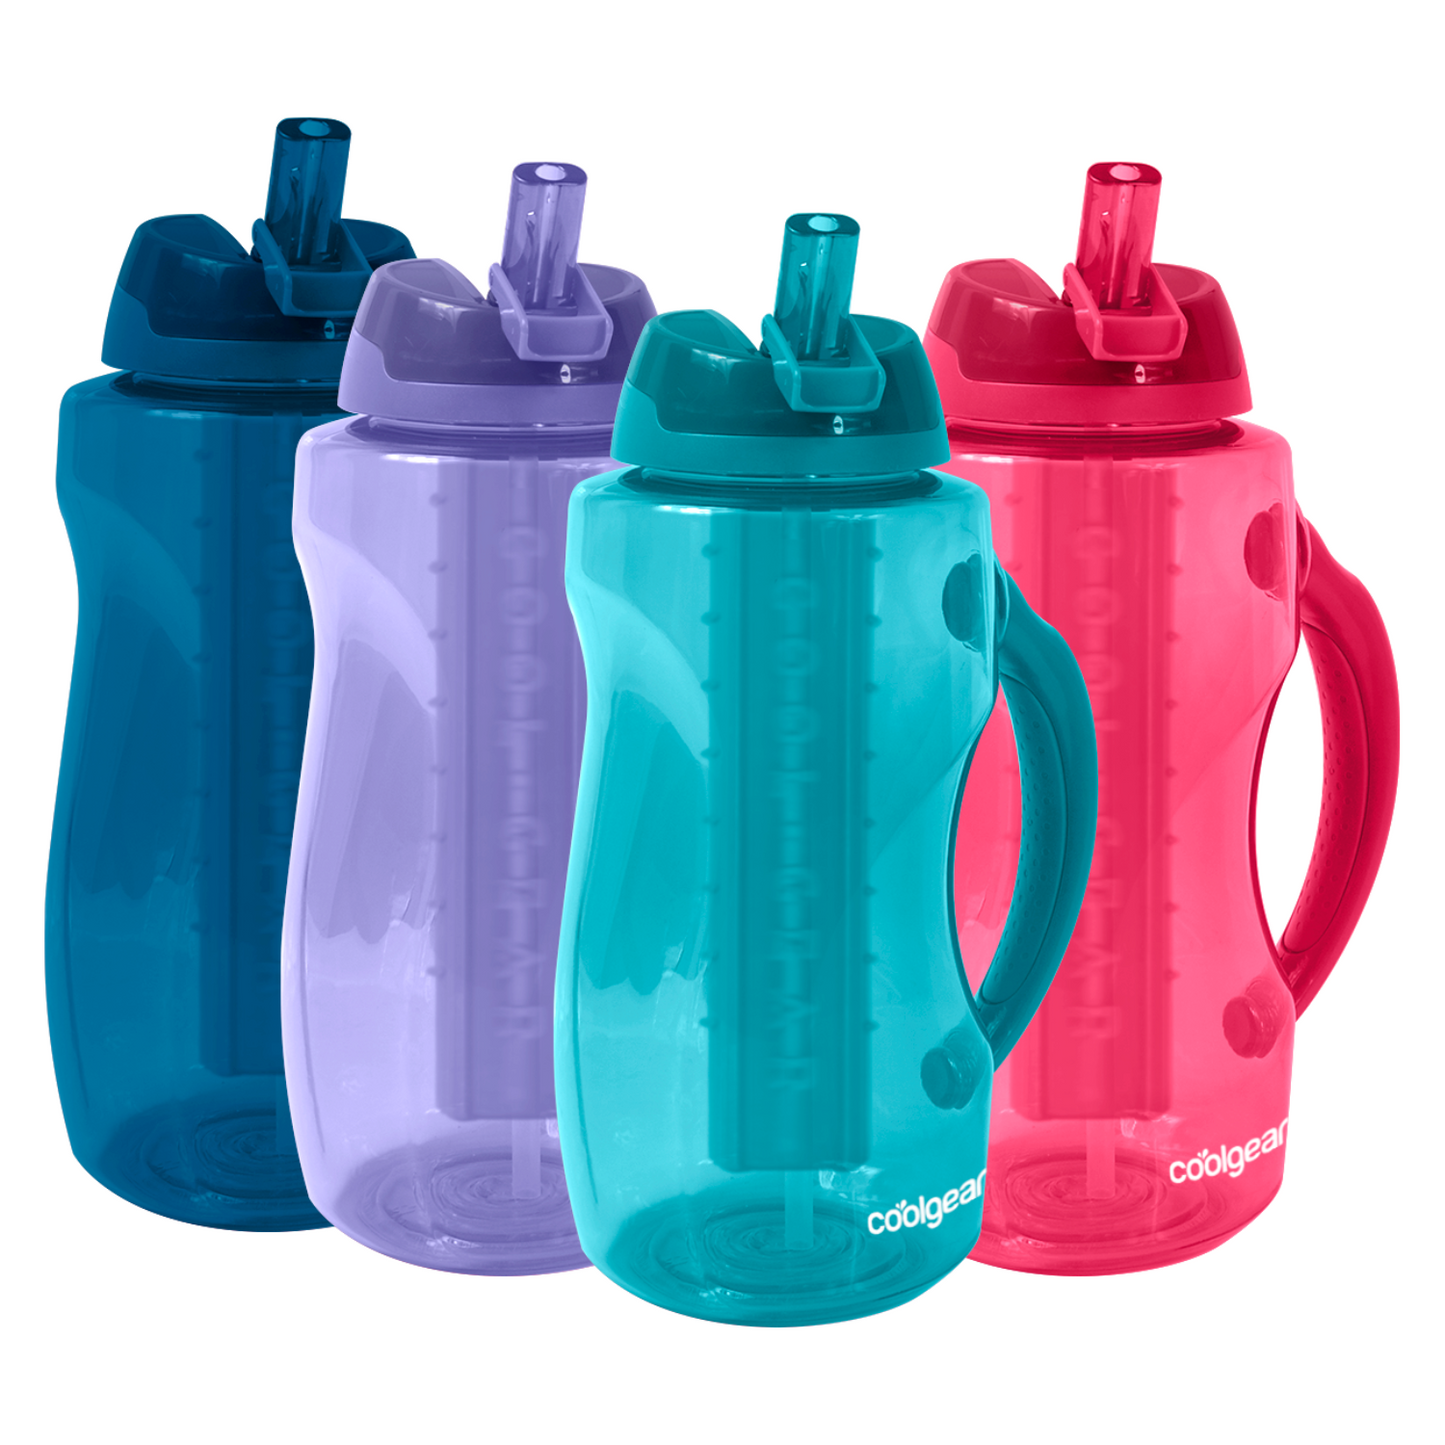 Cool Gear 4-Pack 64 oz Dual Wave Bottle with Freezer Stick | Large Capacity Water Bottle Keeps Drinks Cold for Gym, Outdoors, Travel